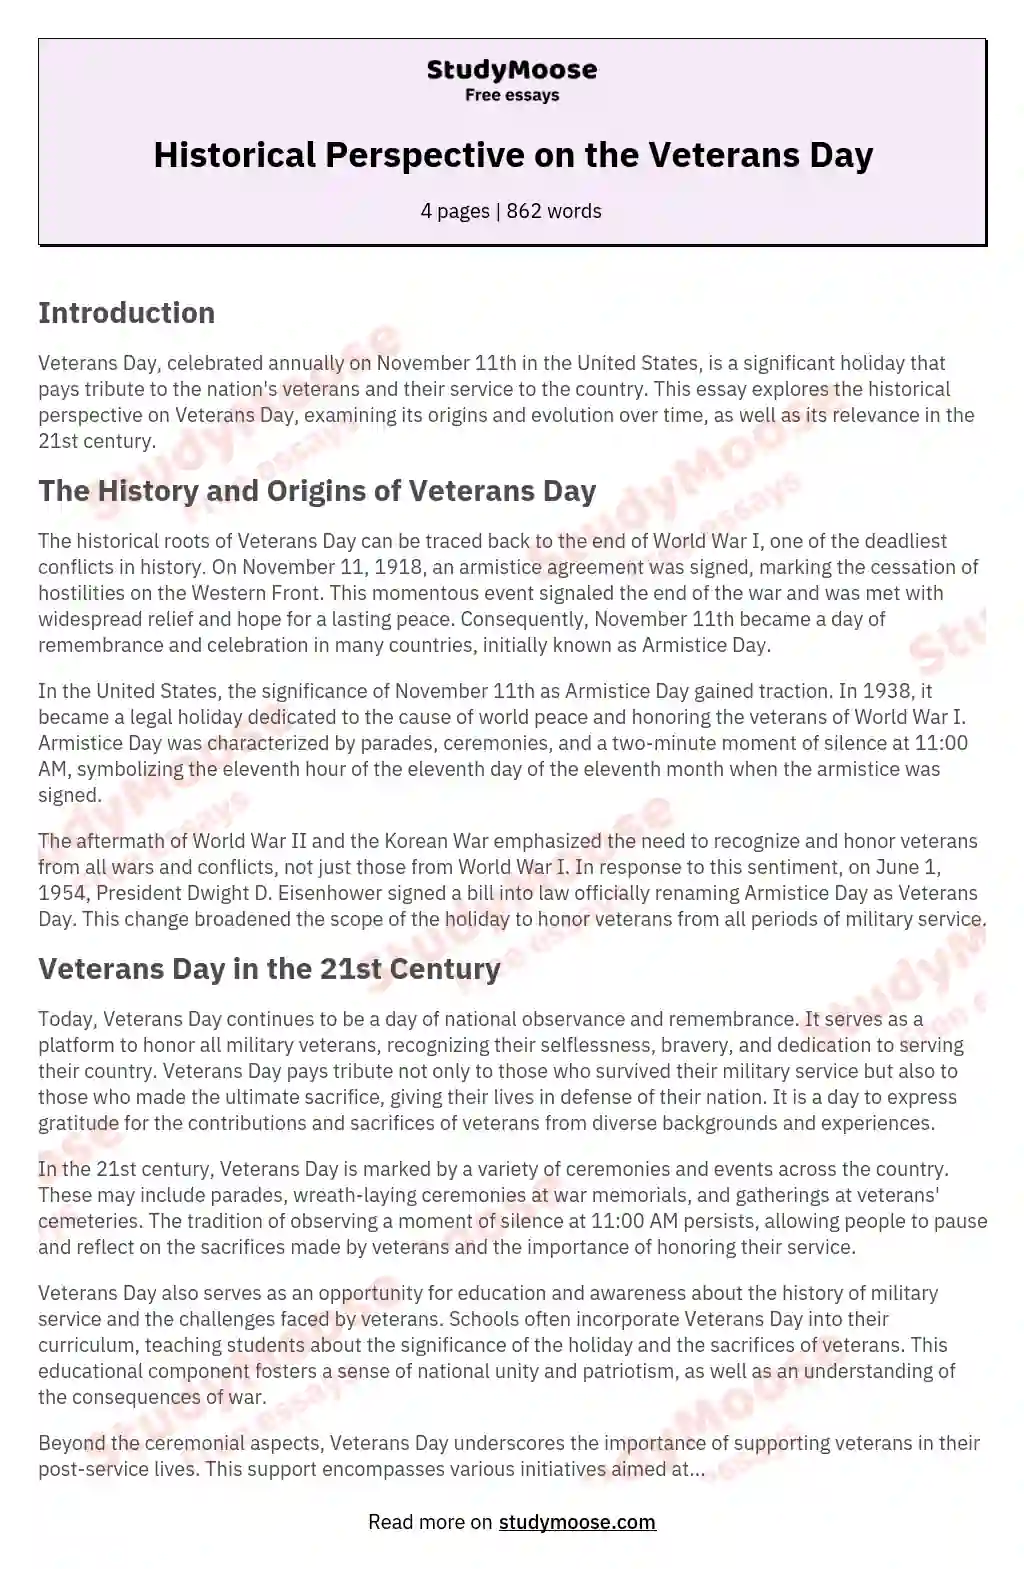 Historical Perspective on the Veterans Day essay